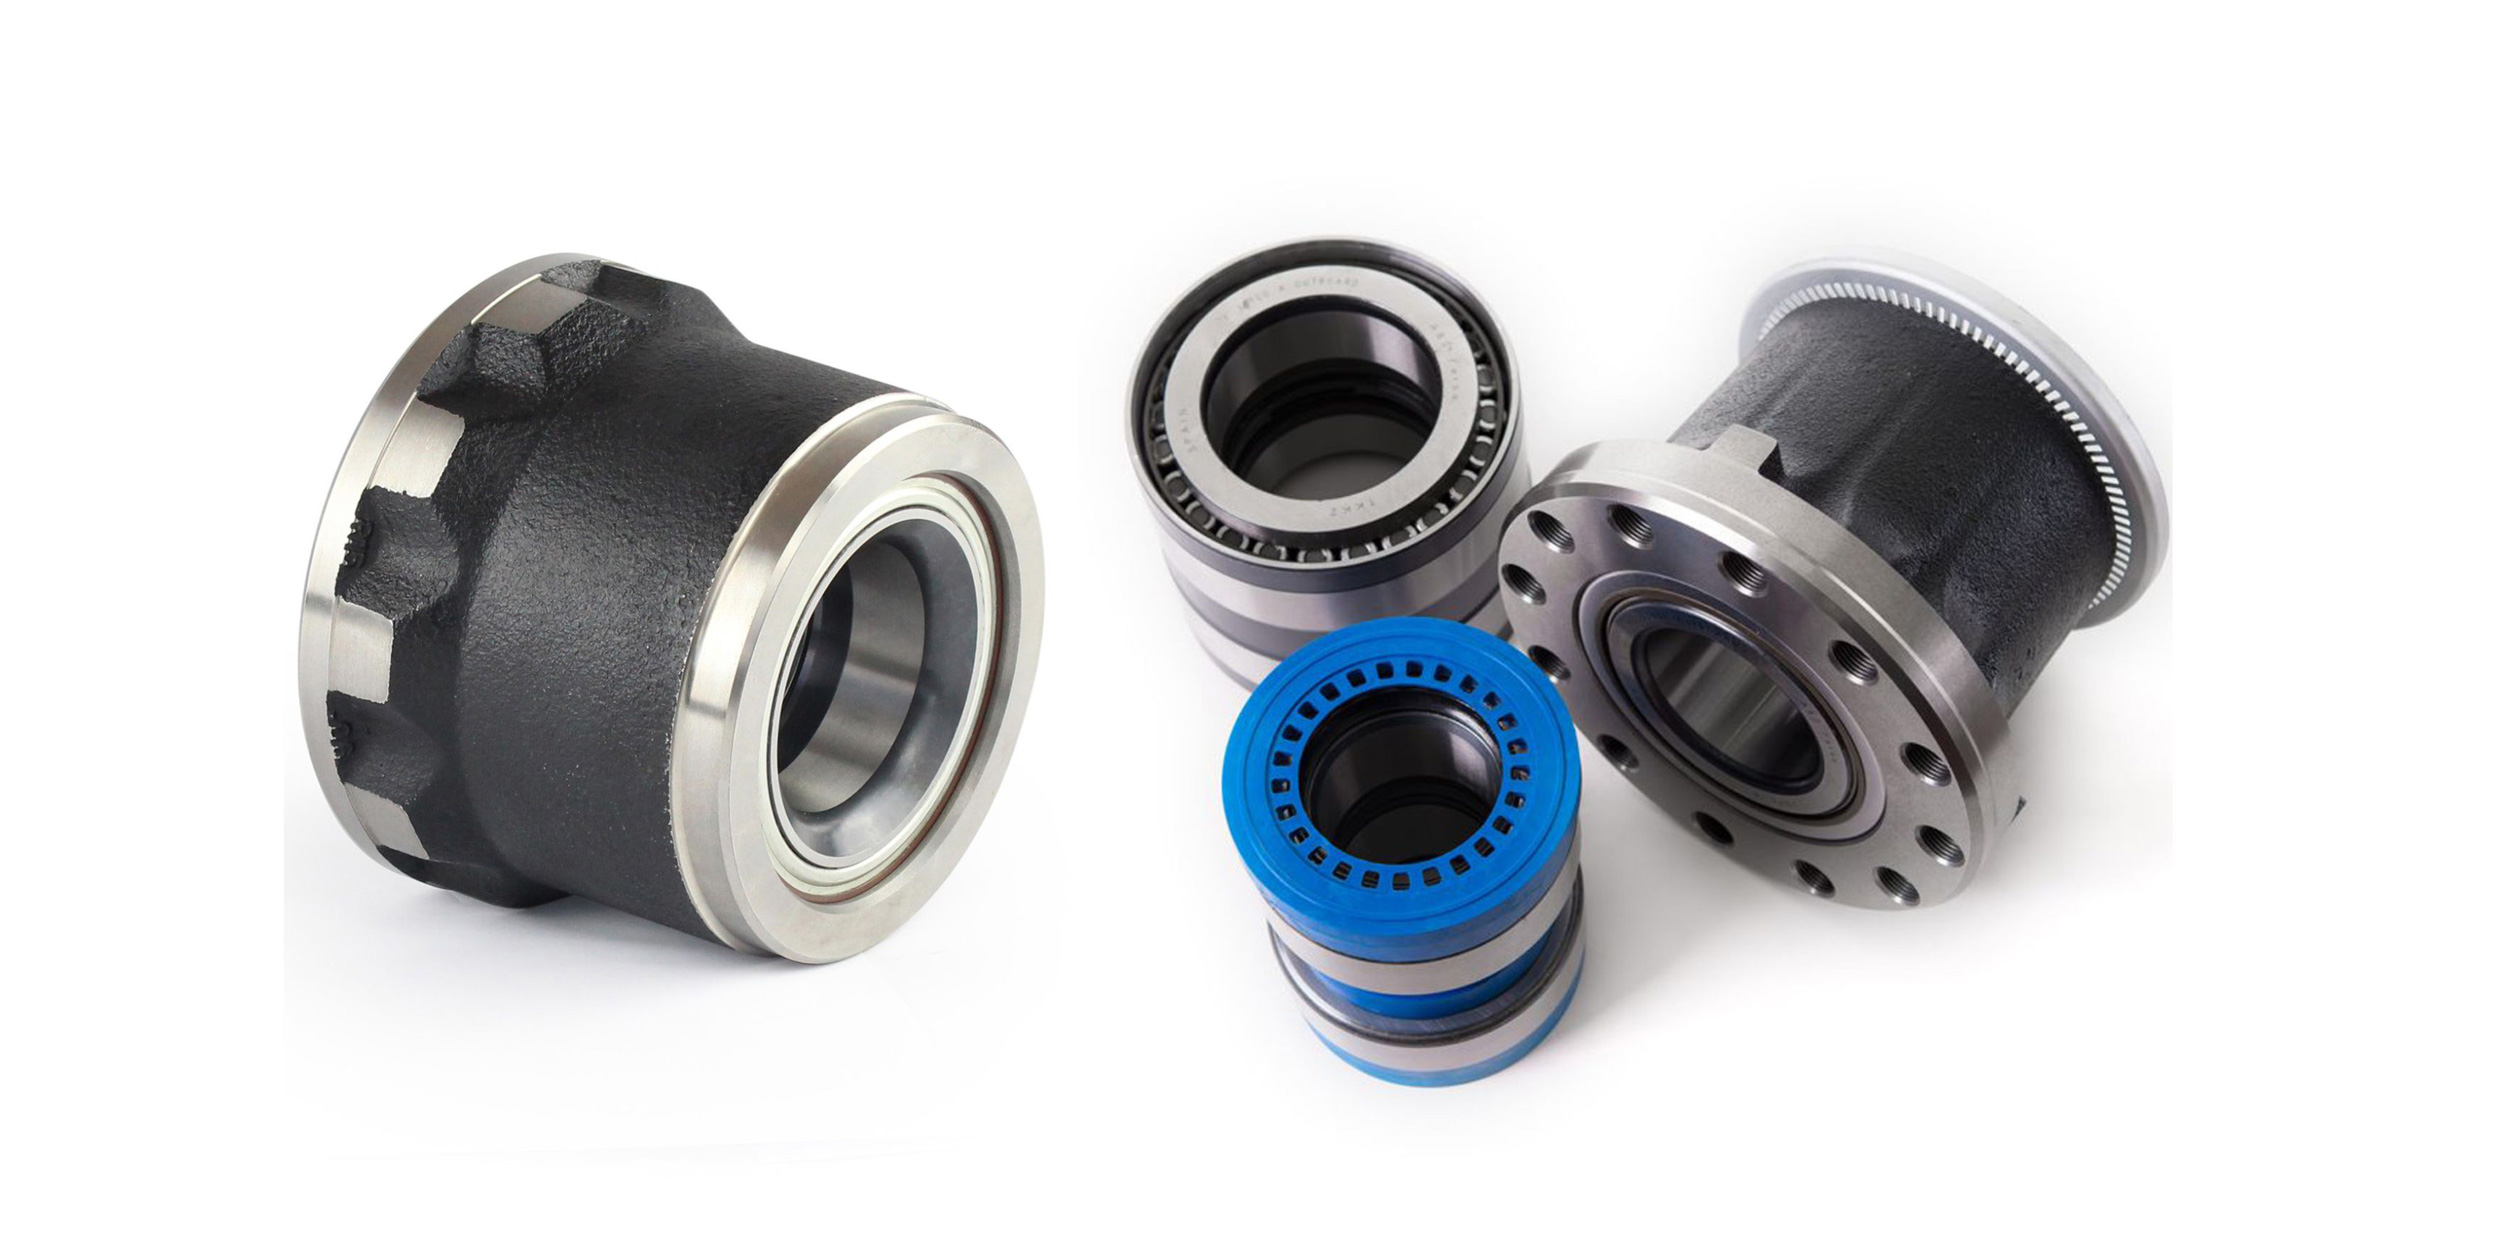 Selection of Fersa wheel end hub bearings, wheel end kits and modules for commercial vehicle wheel end applications